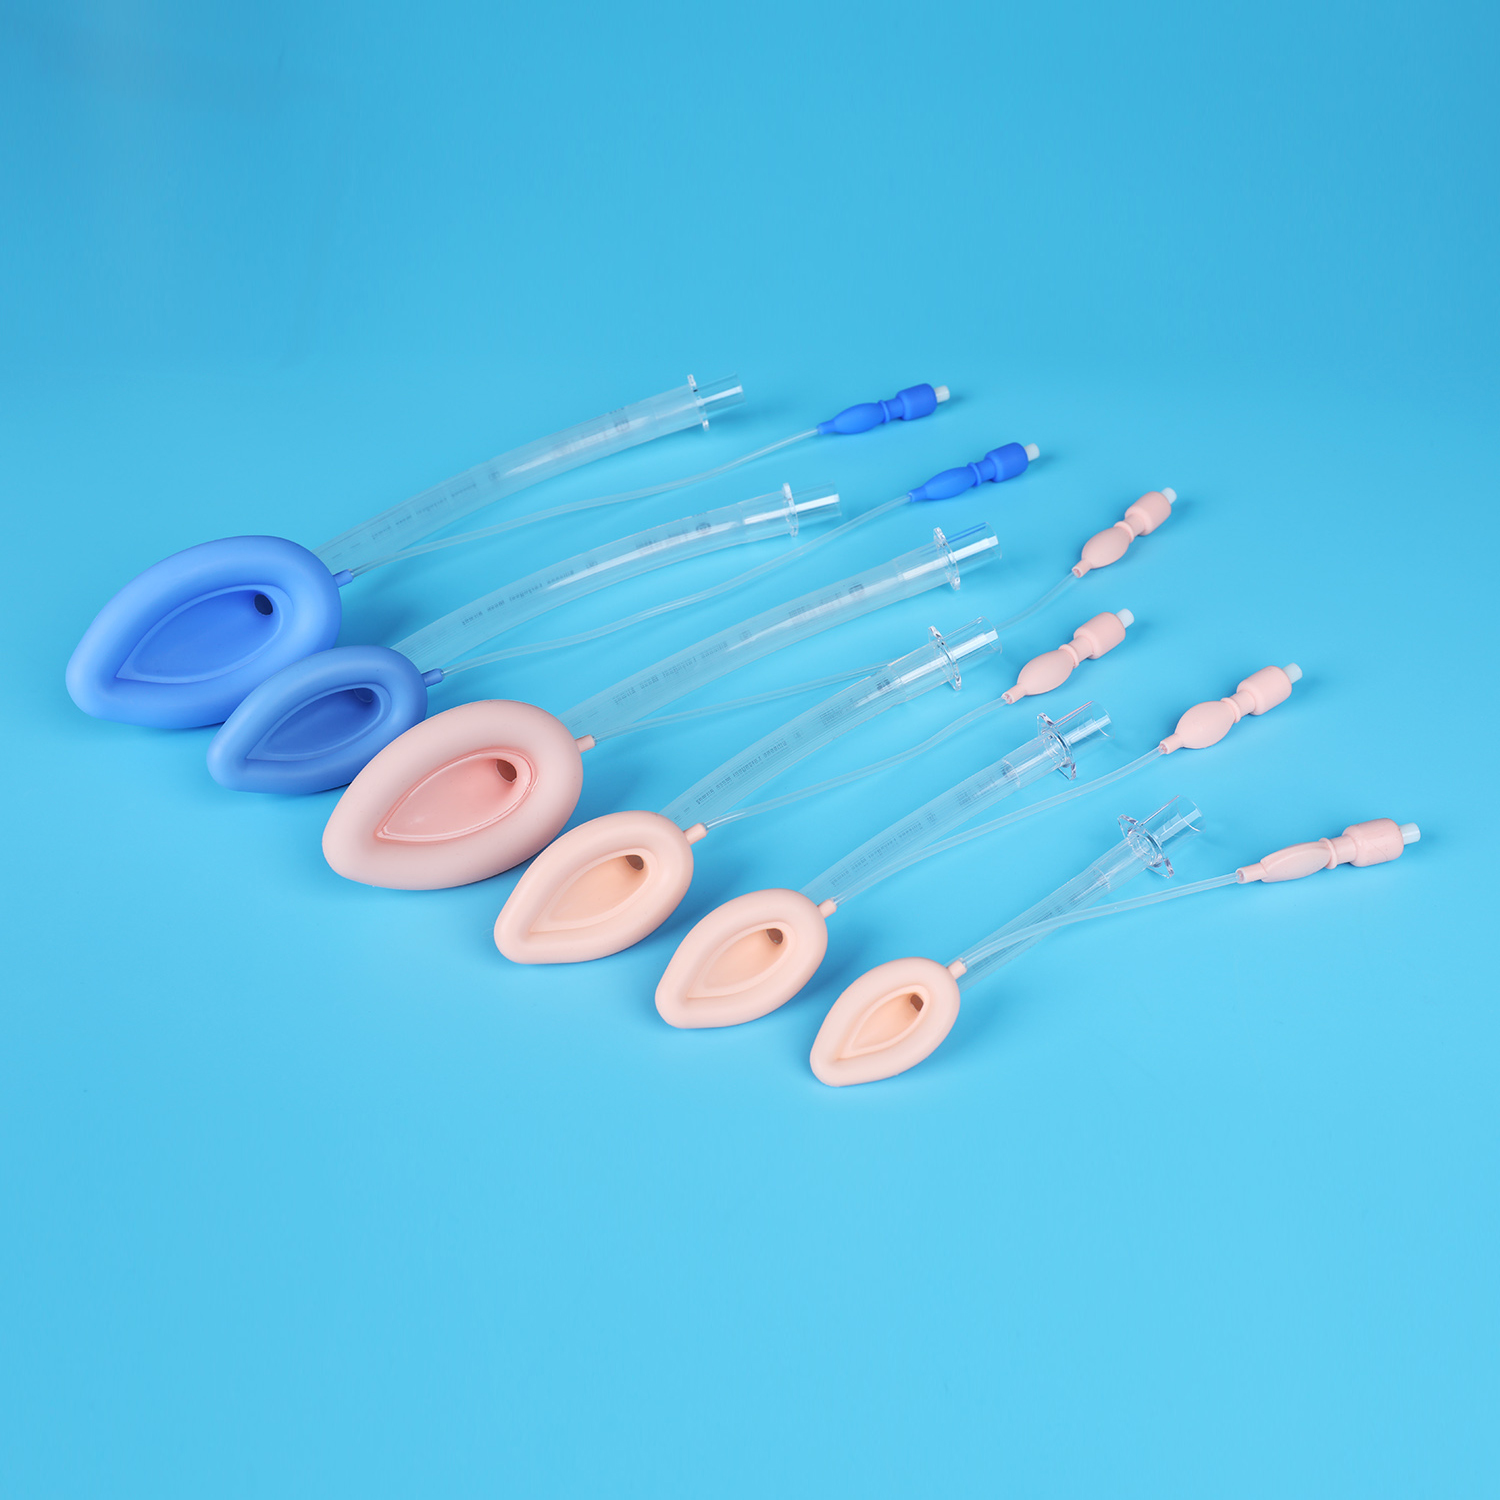 Reusable or Disposable Anesthesia Laryngeal Mask Airway Silicone Medical Device Health Care